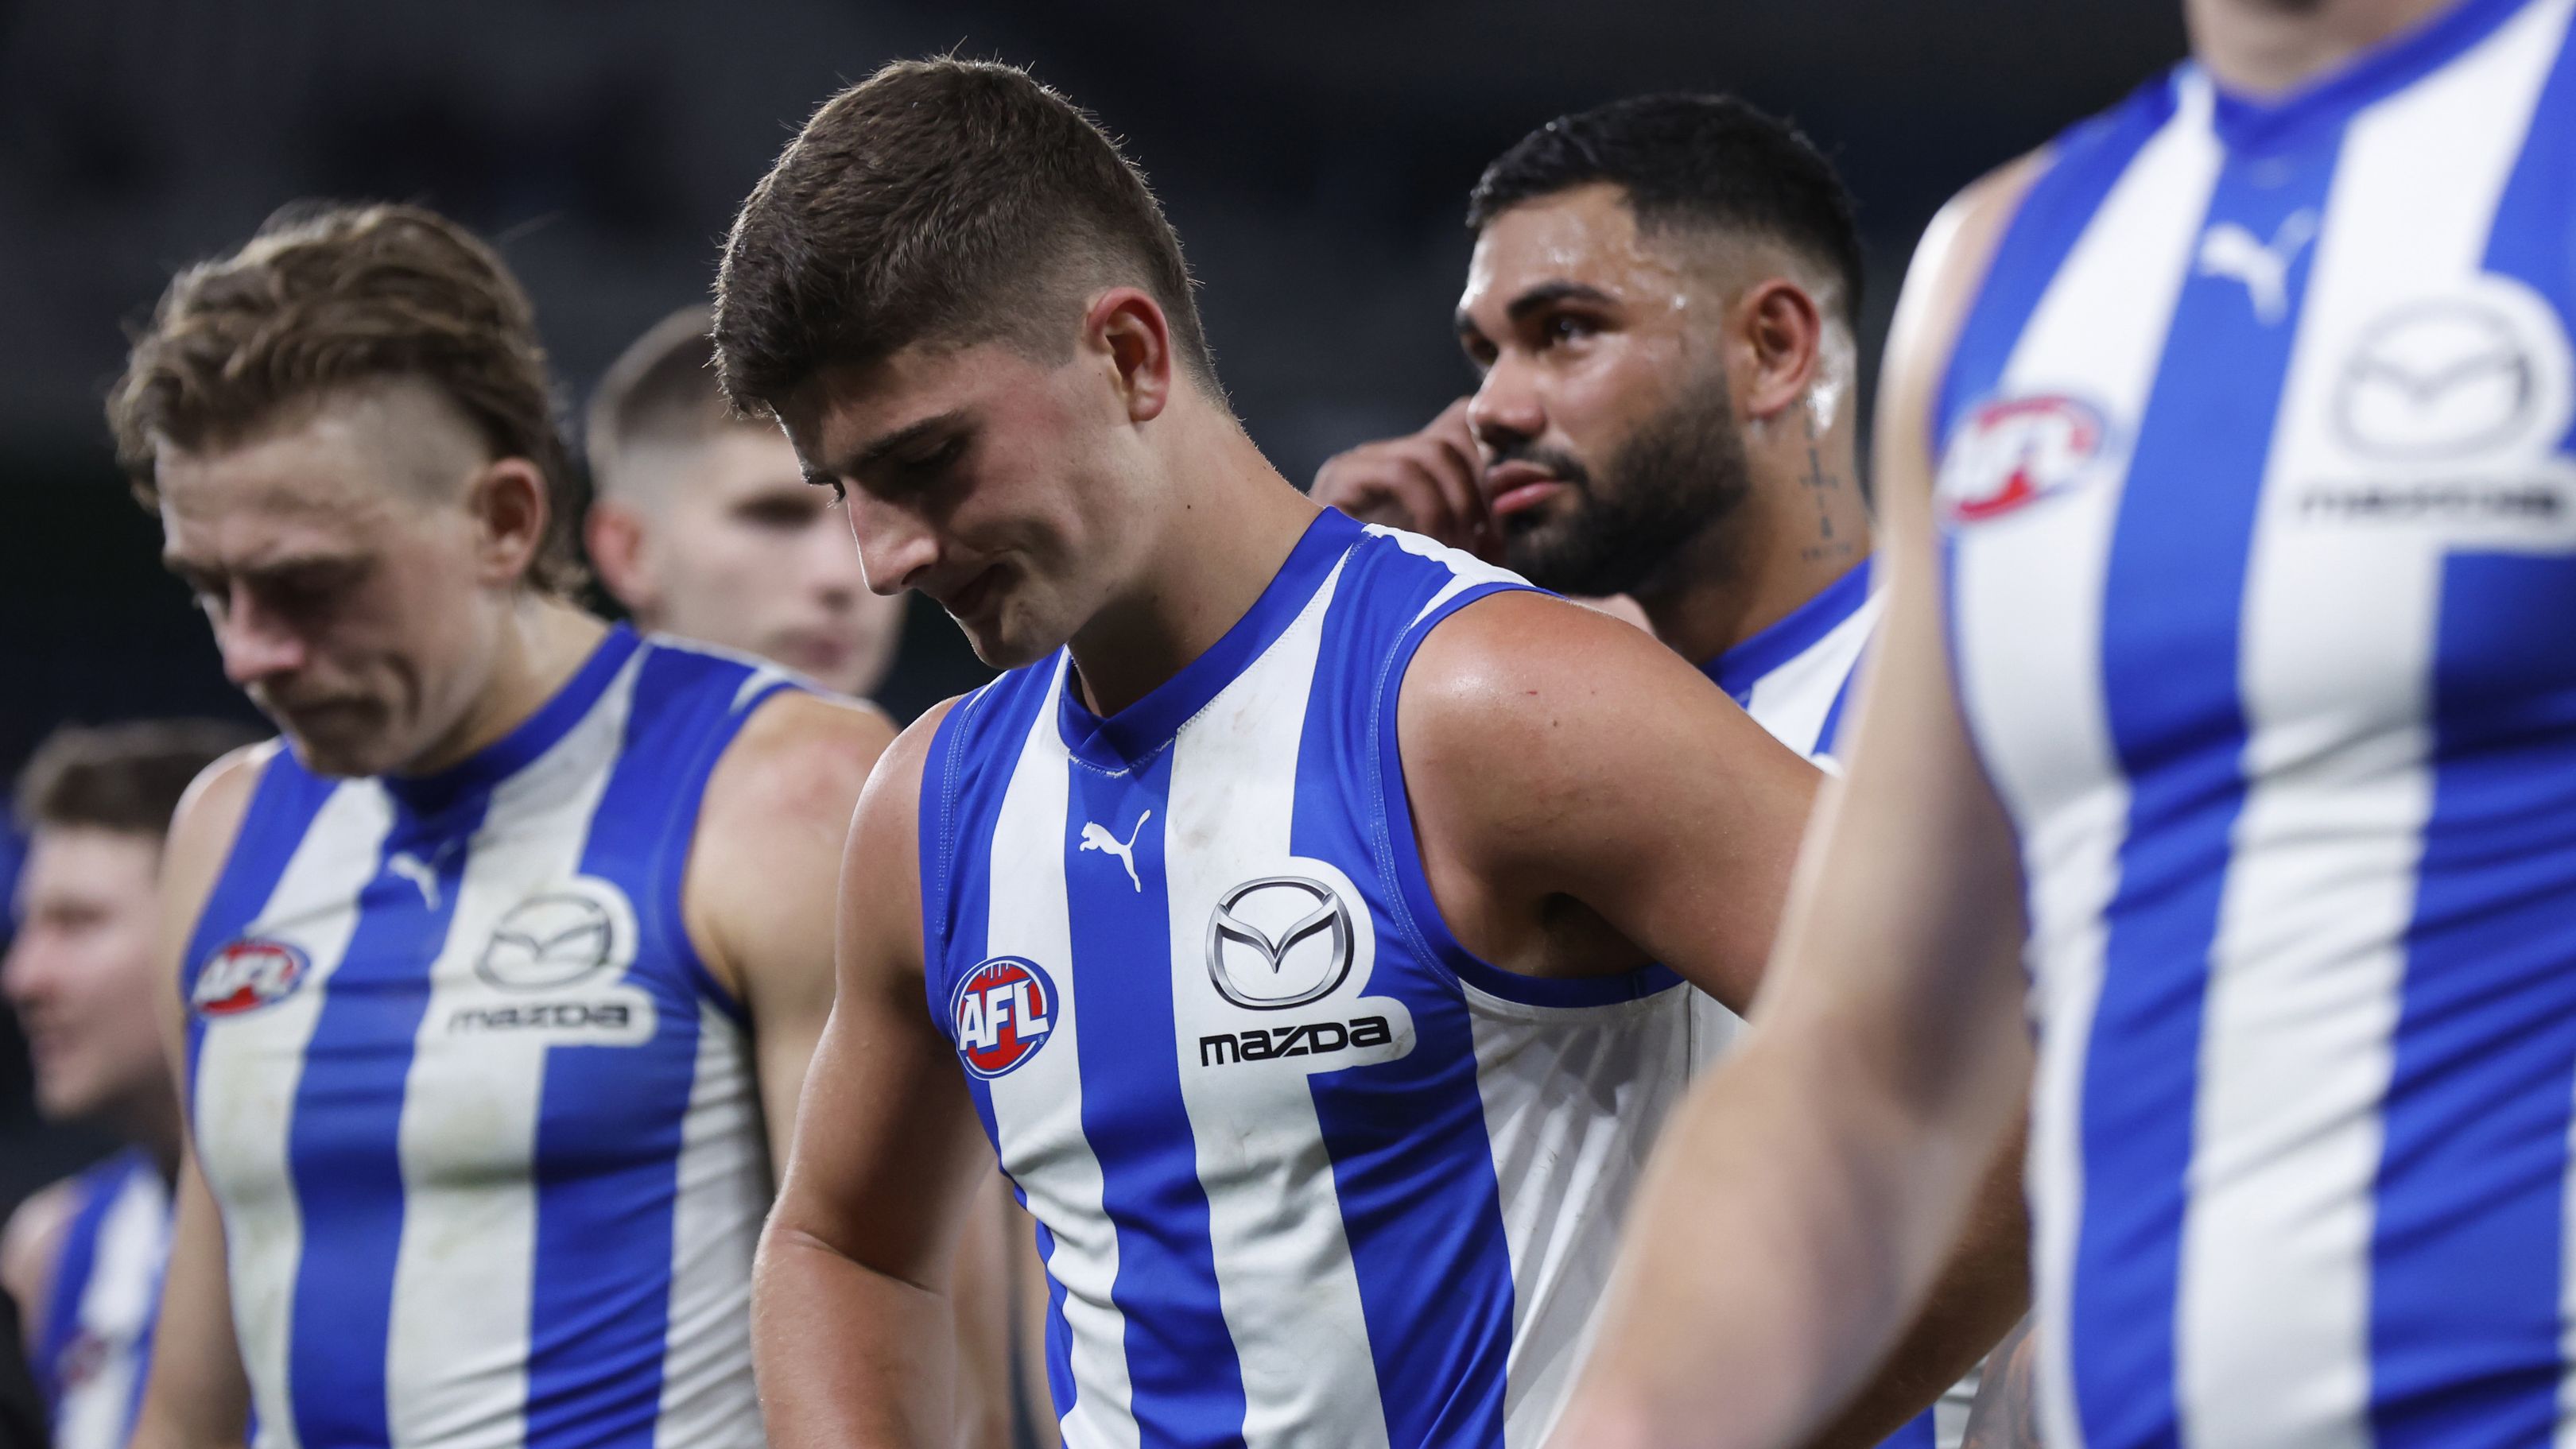 Dejected North Melbourne players walk from the ground after the round 14 AFL match between North Melbourne Kangaroos and Western Bulldogs.